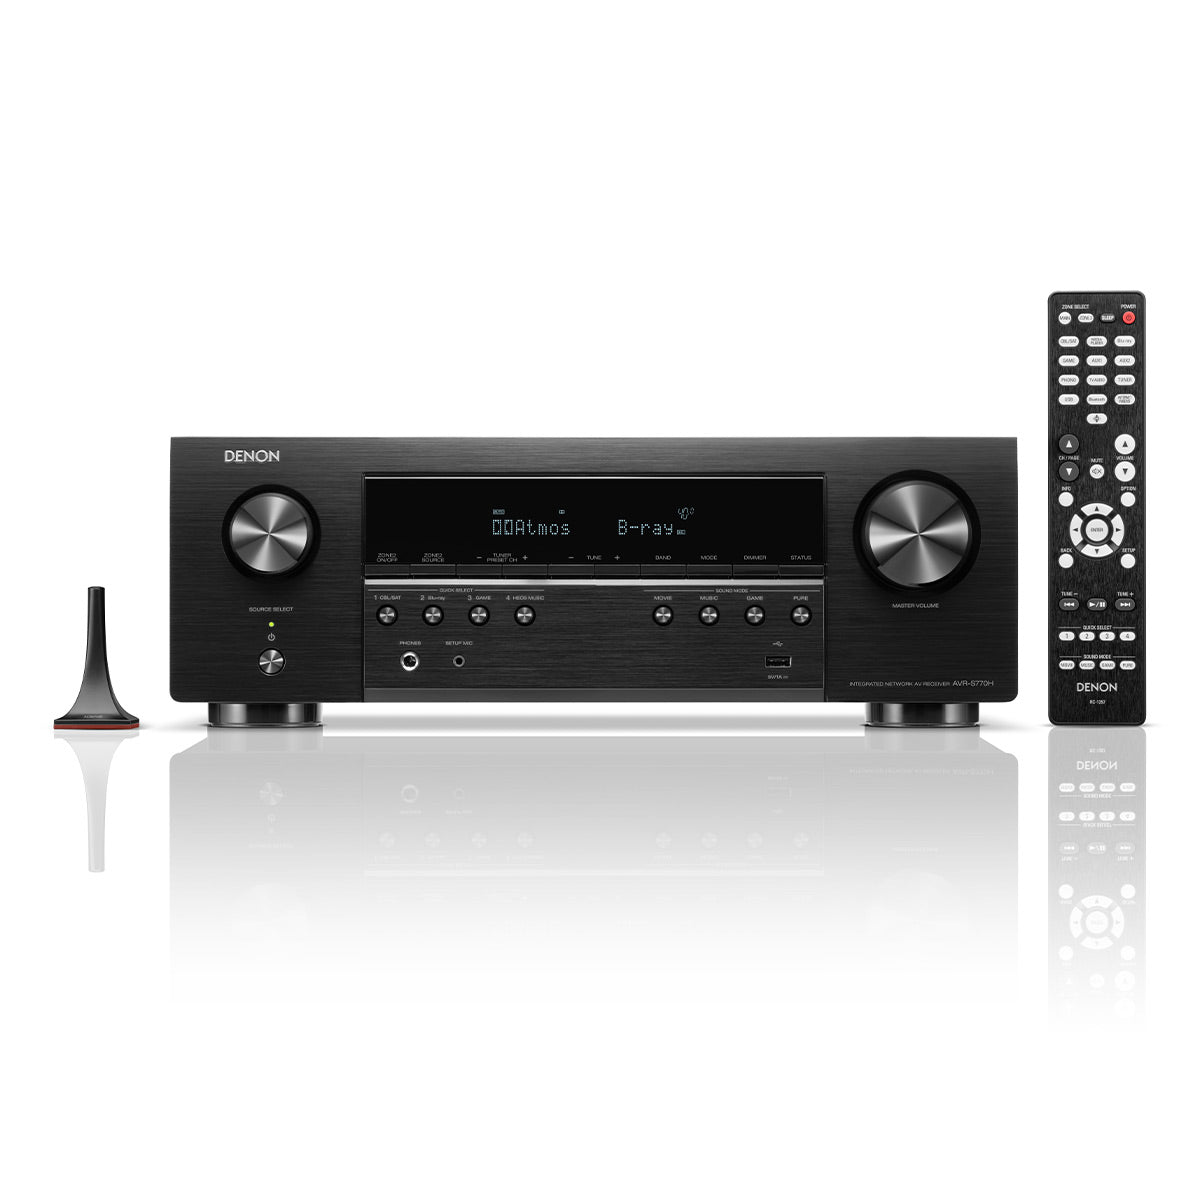 Denon AVR-S770H 7.2 Channel 8K Home Theater Receiver with Dolby Atmos, HDR10+, and HEOS Built-In